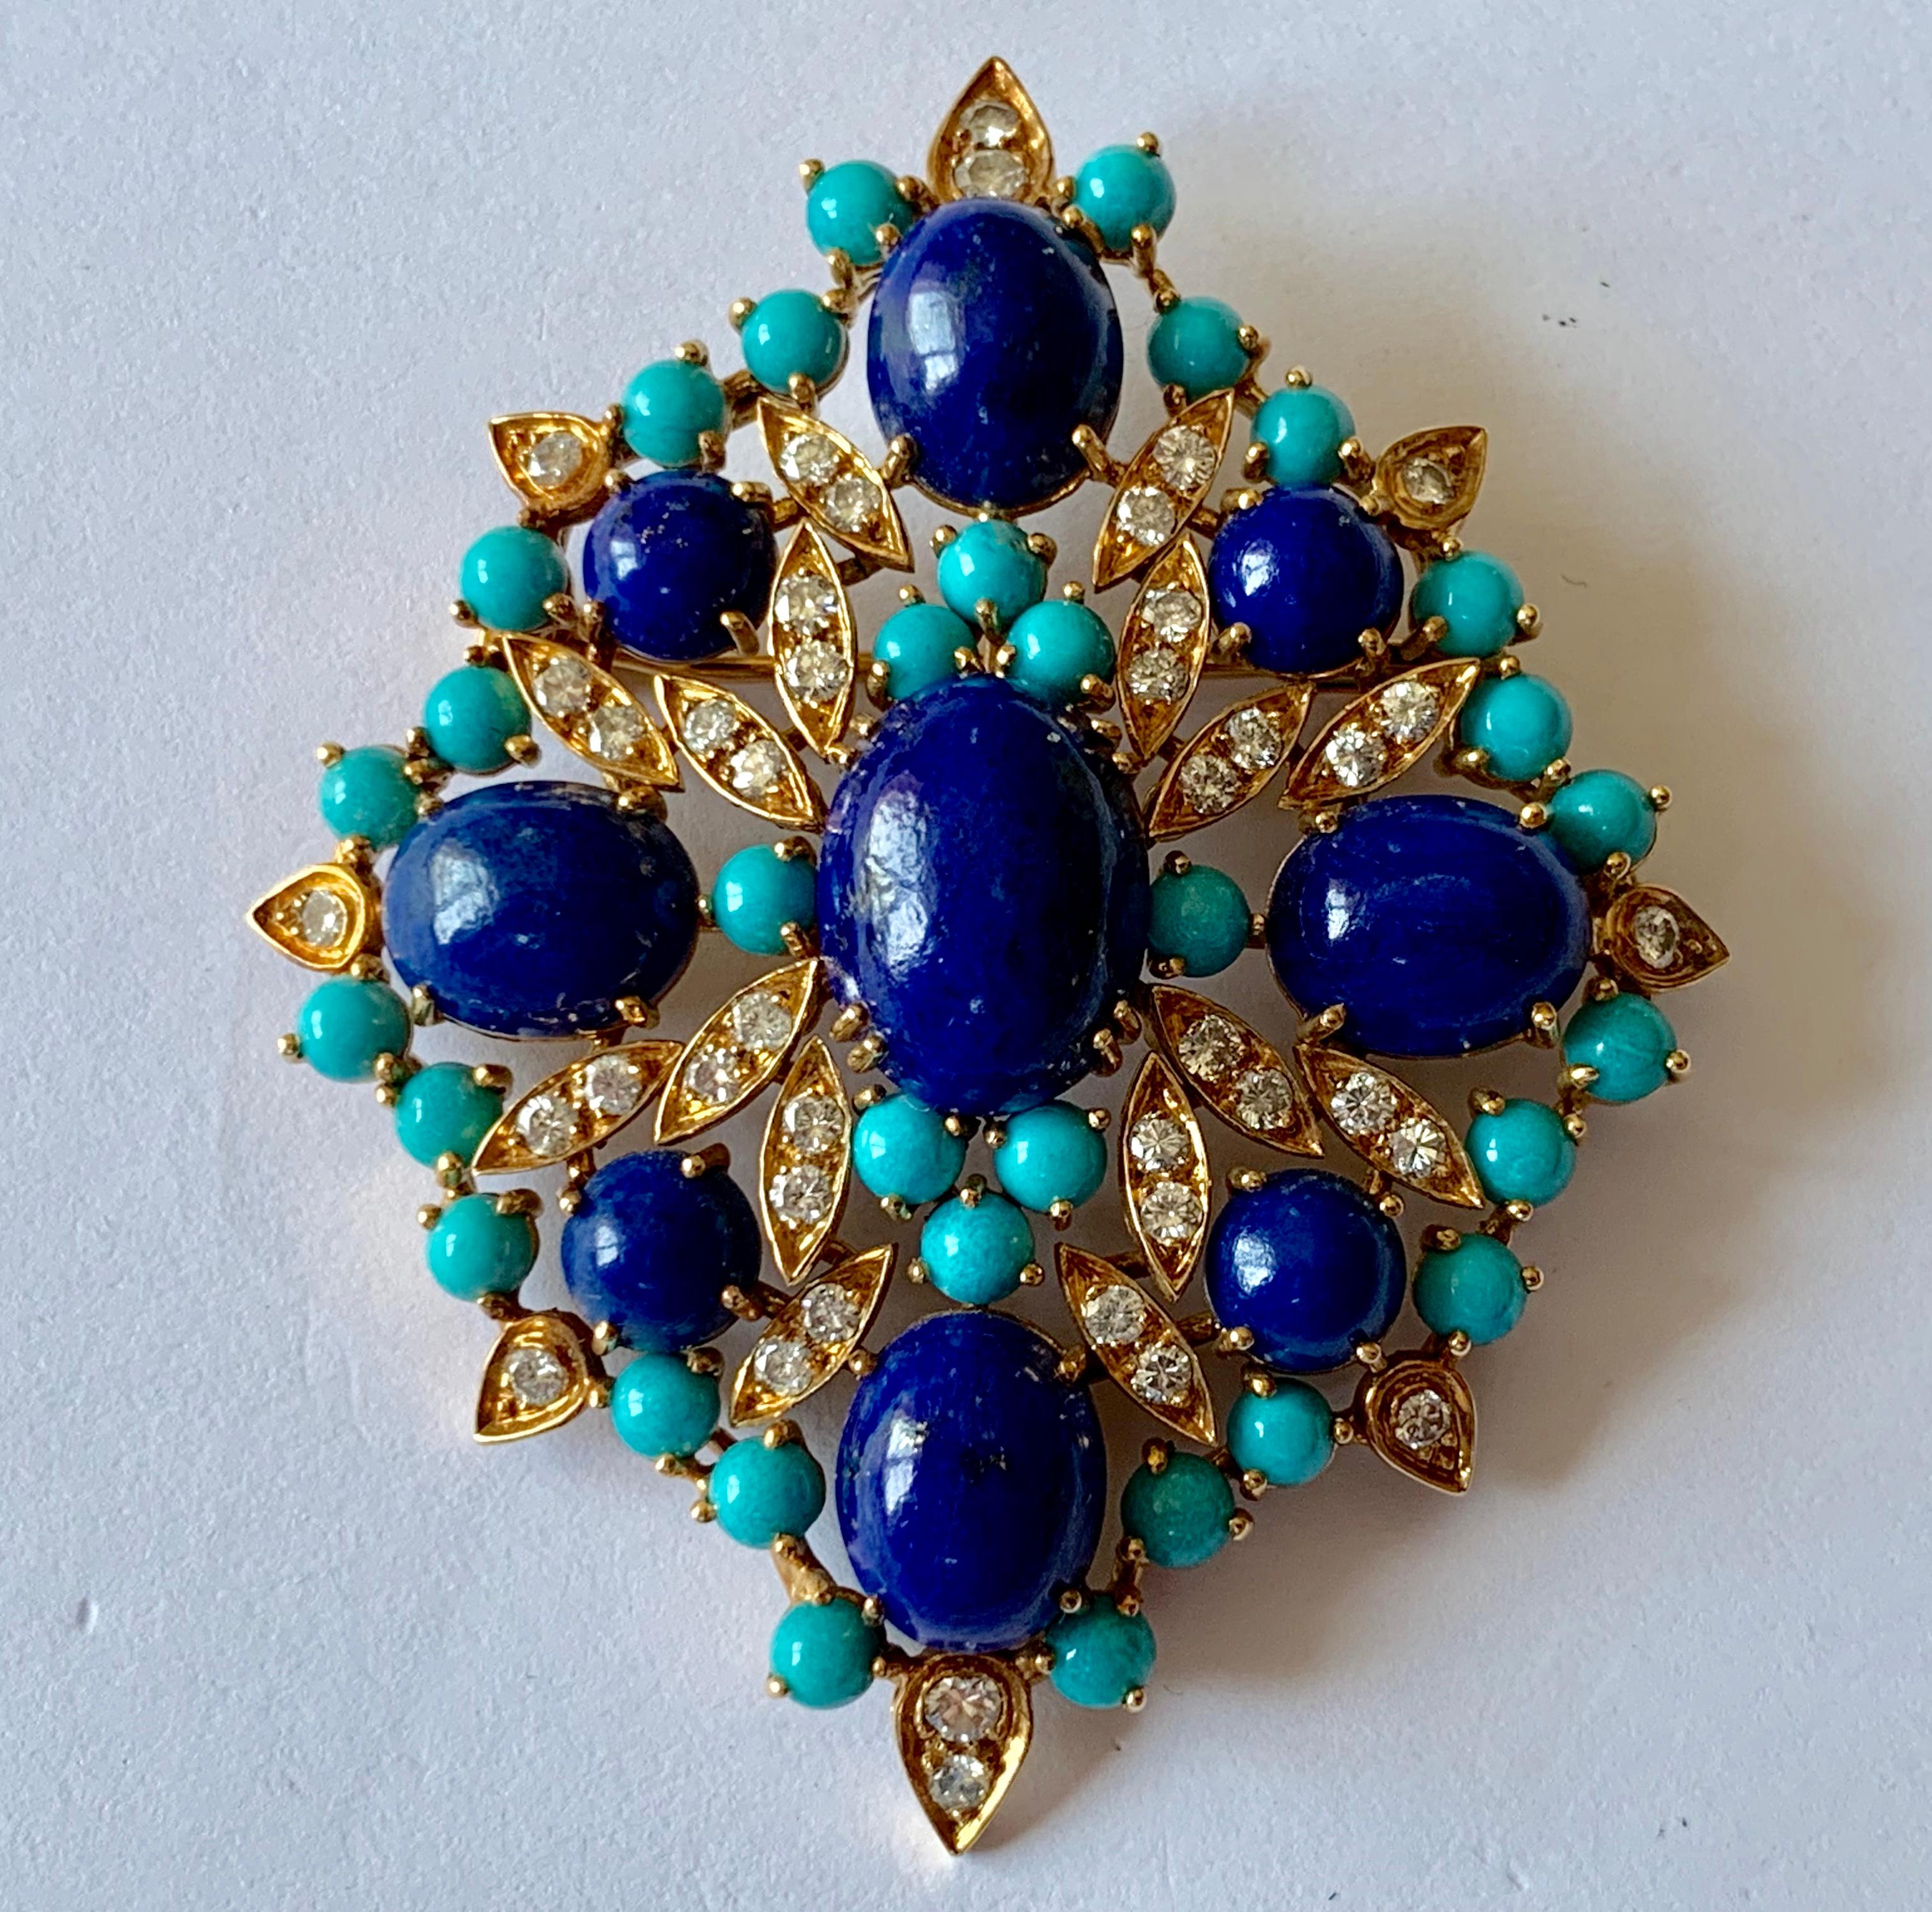 Turquoise, lapis and diamond brooch/pendant, circa 1960. A 18 K yellow gold  brooch/pendant set with 9 cabochons Lapis Lazuli and round turquoises cabochons, all in yellow gold claw settings and 24 round brilliant cut diamonds weighing approximately